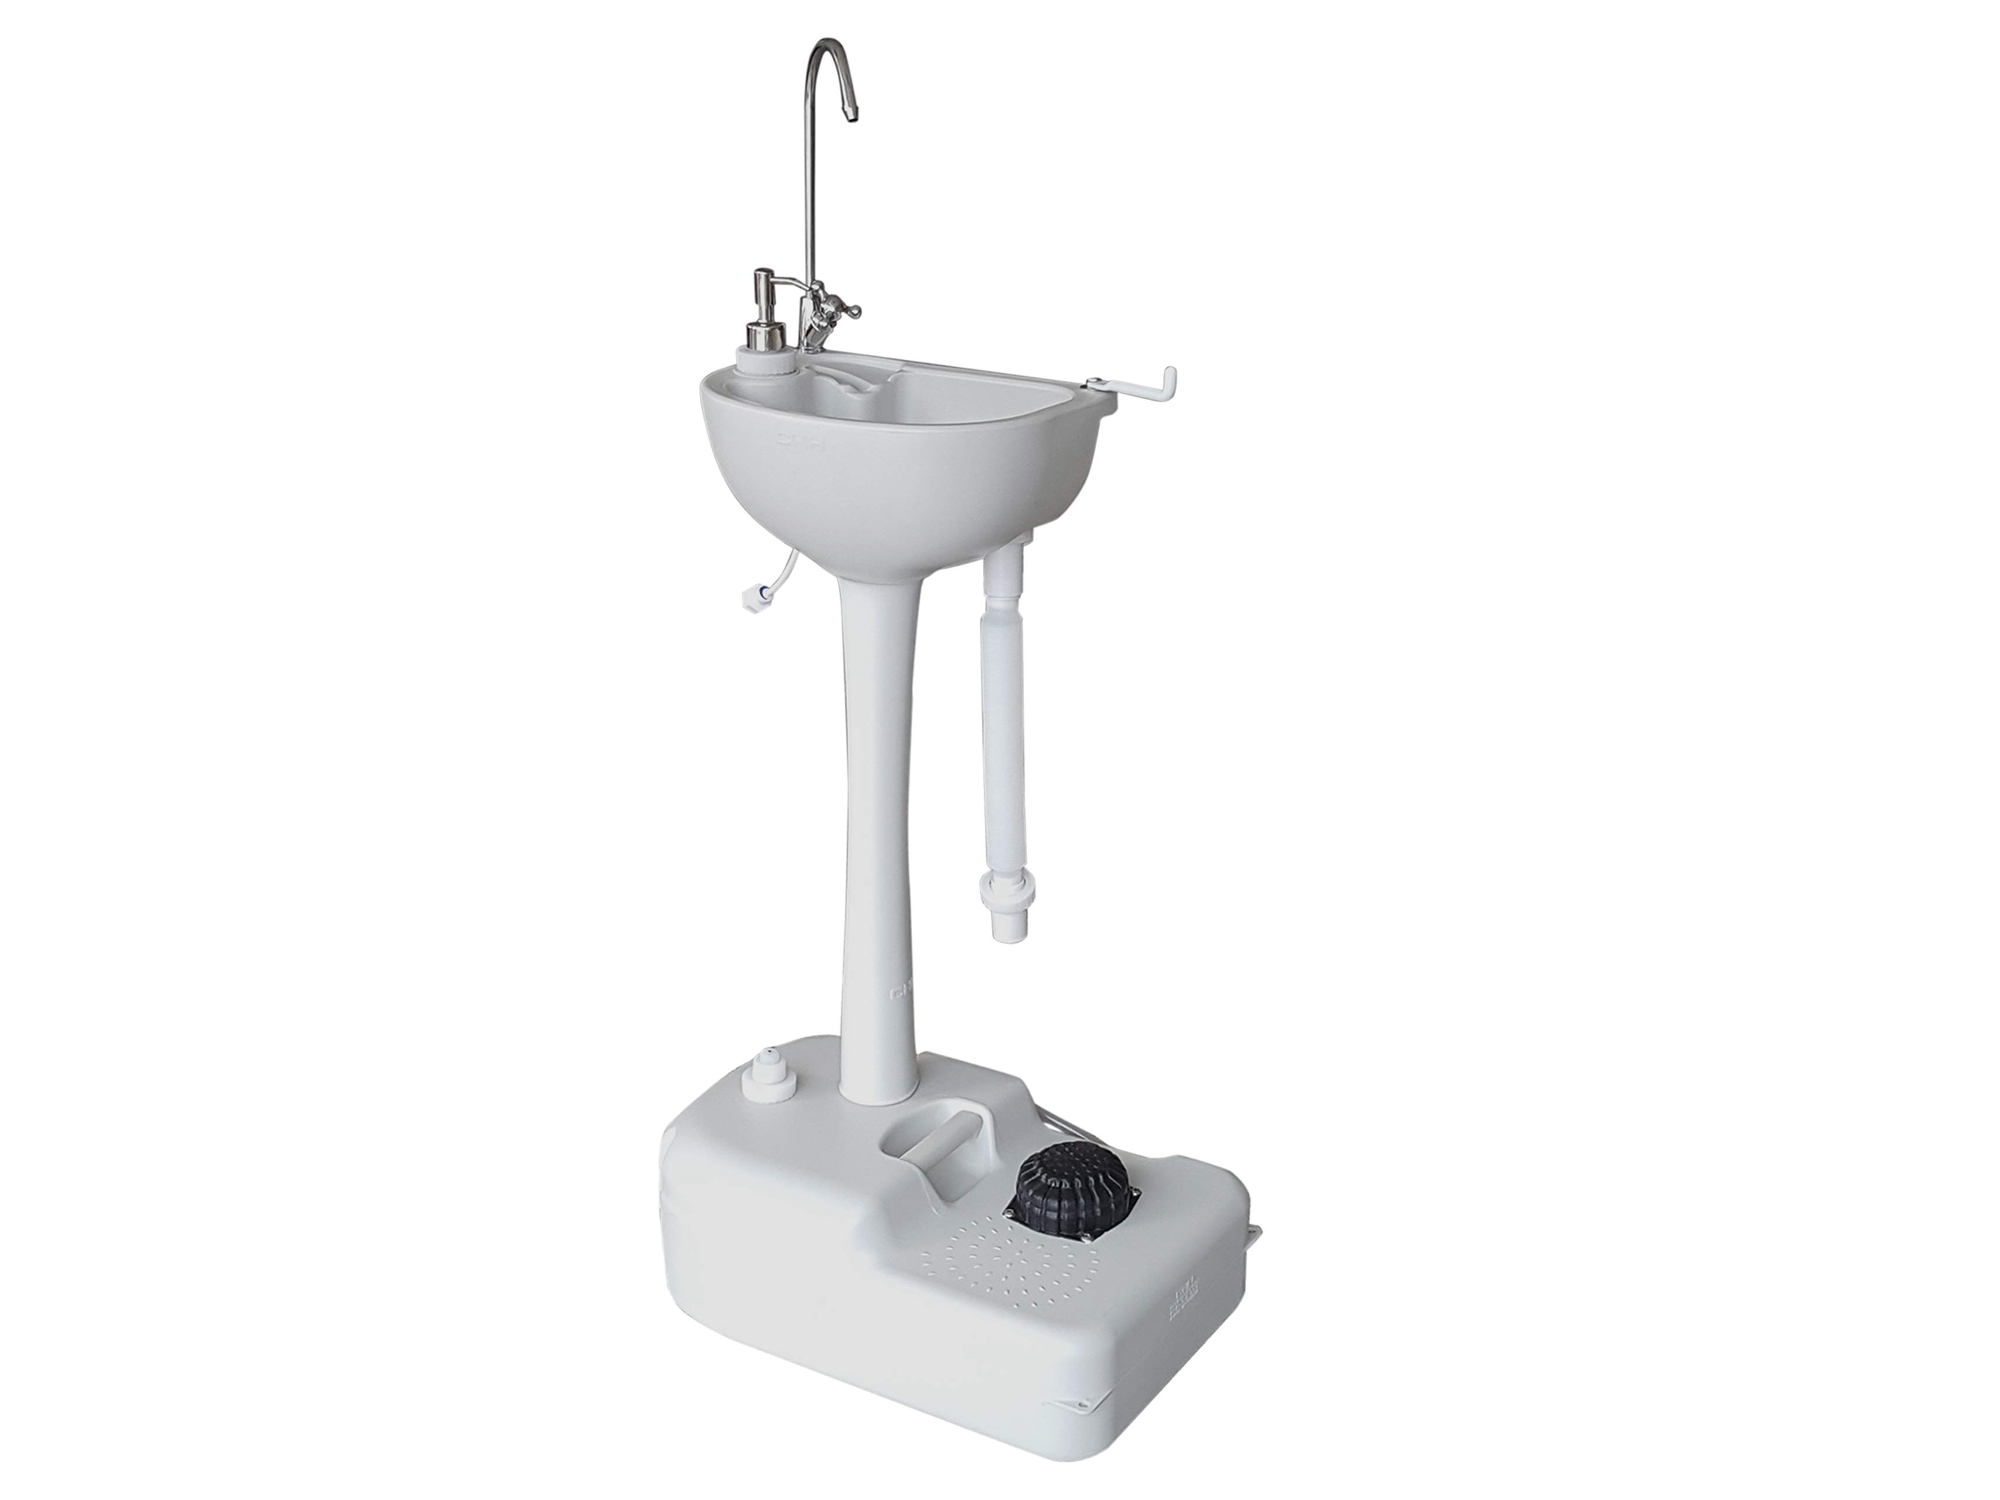 Image of Hike Crew Portable Sink & Hand Washing Station 19L Water Tank White ID 843812103190